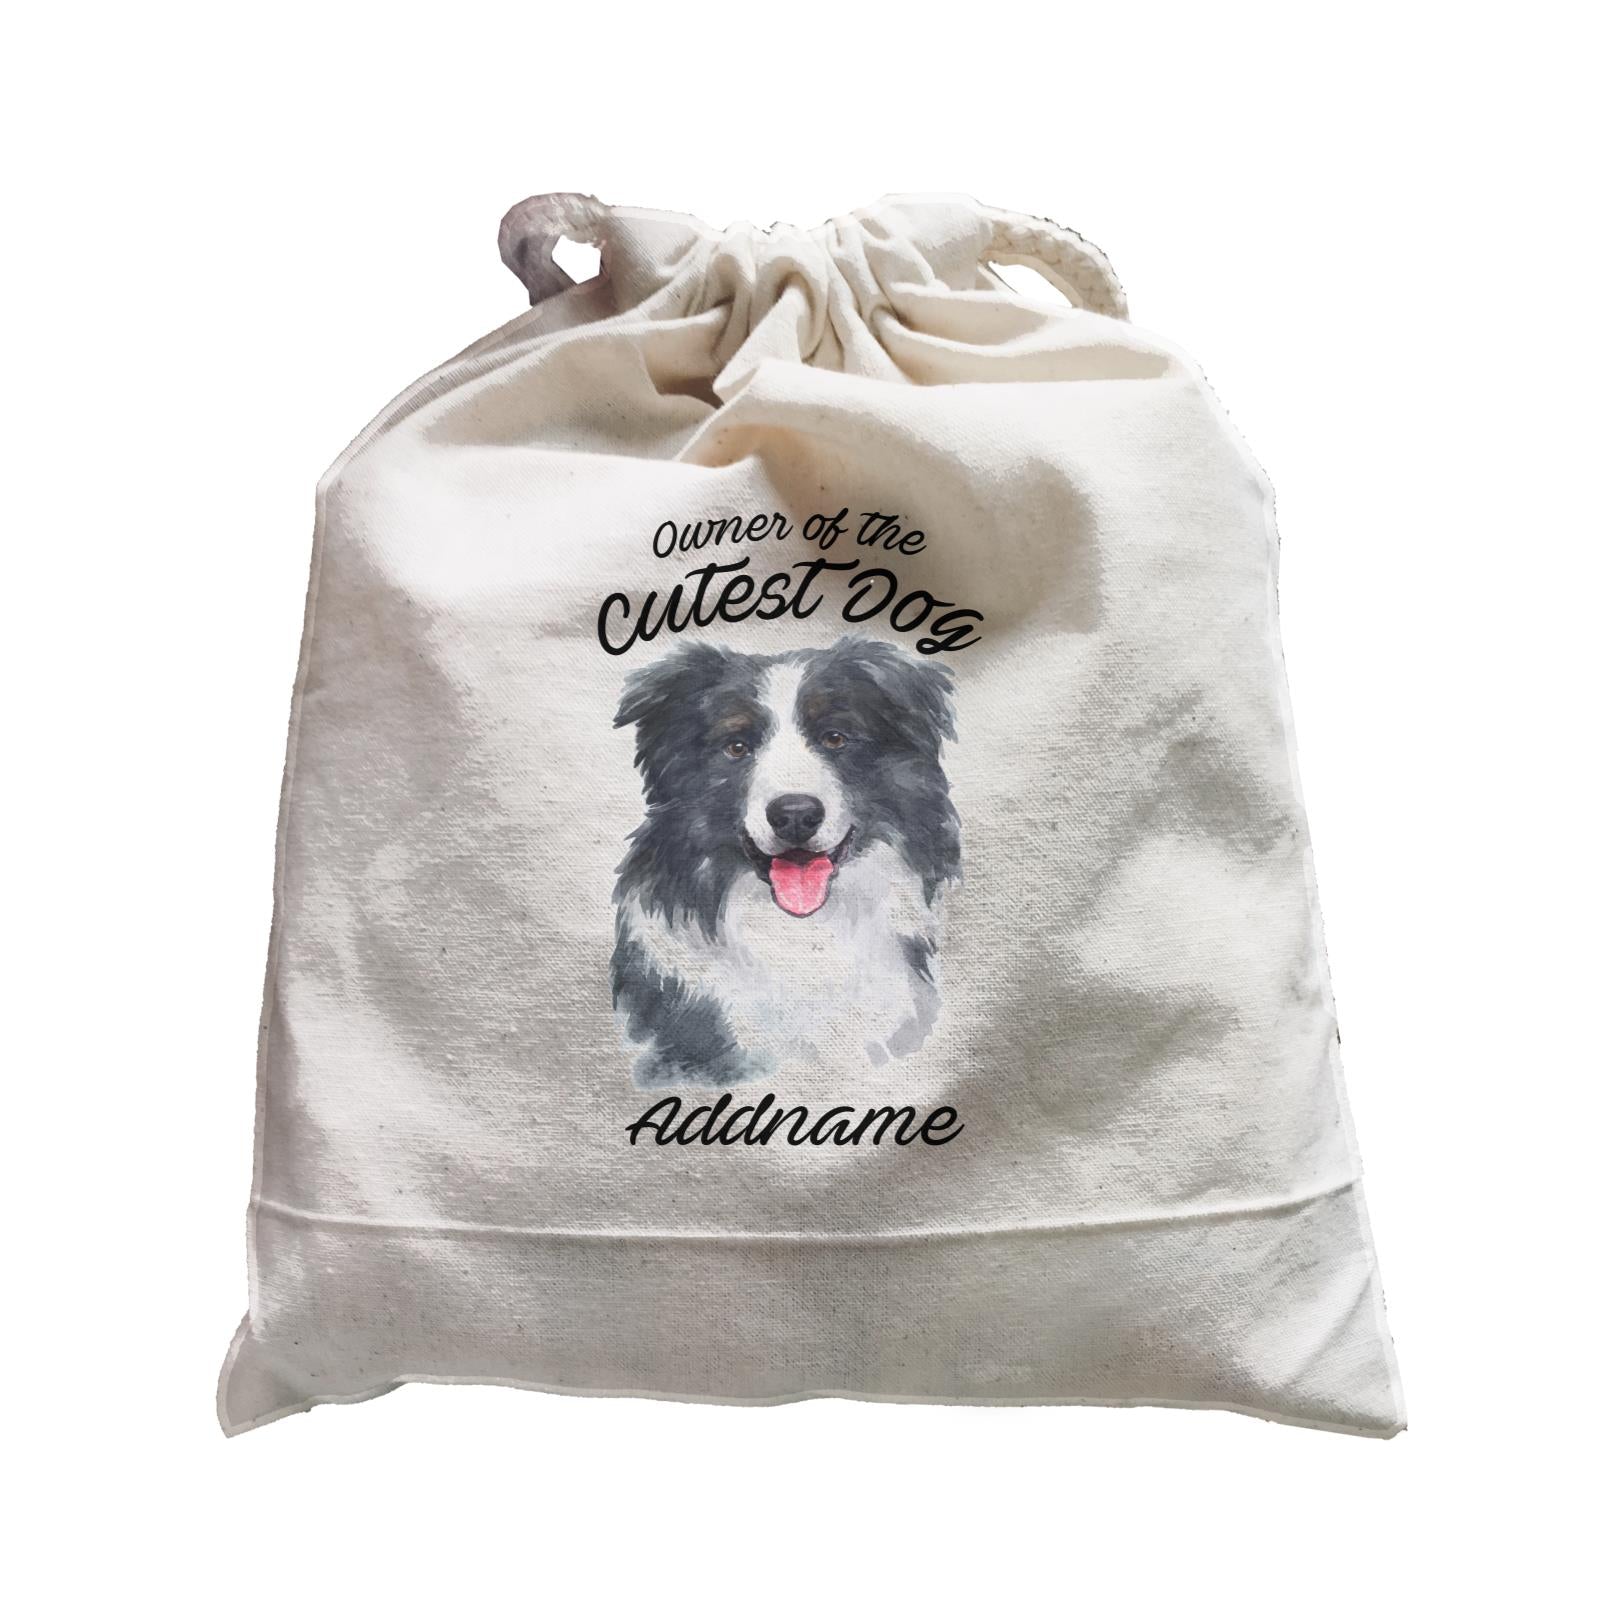 Watercolor Dog Owner Of The Cutest Dog Border Collie Addname Satchel